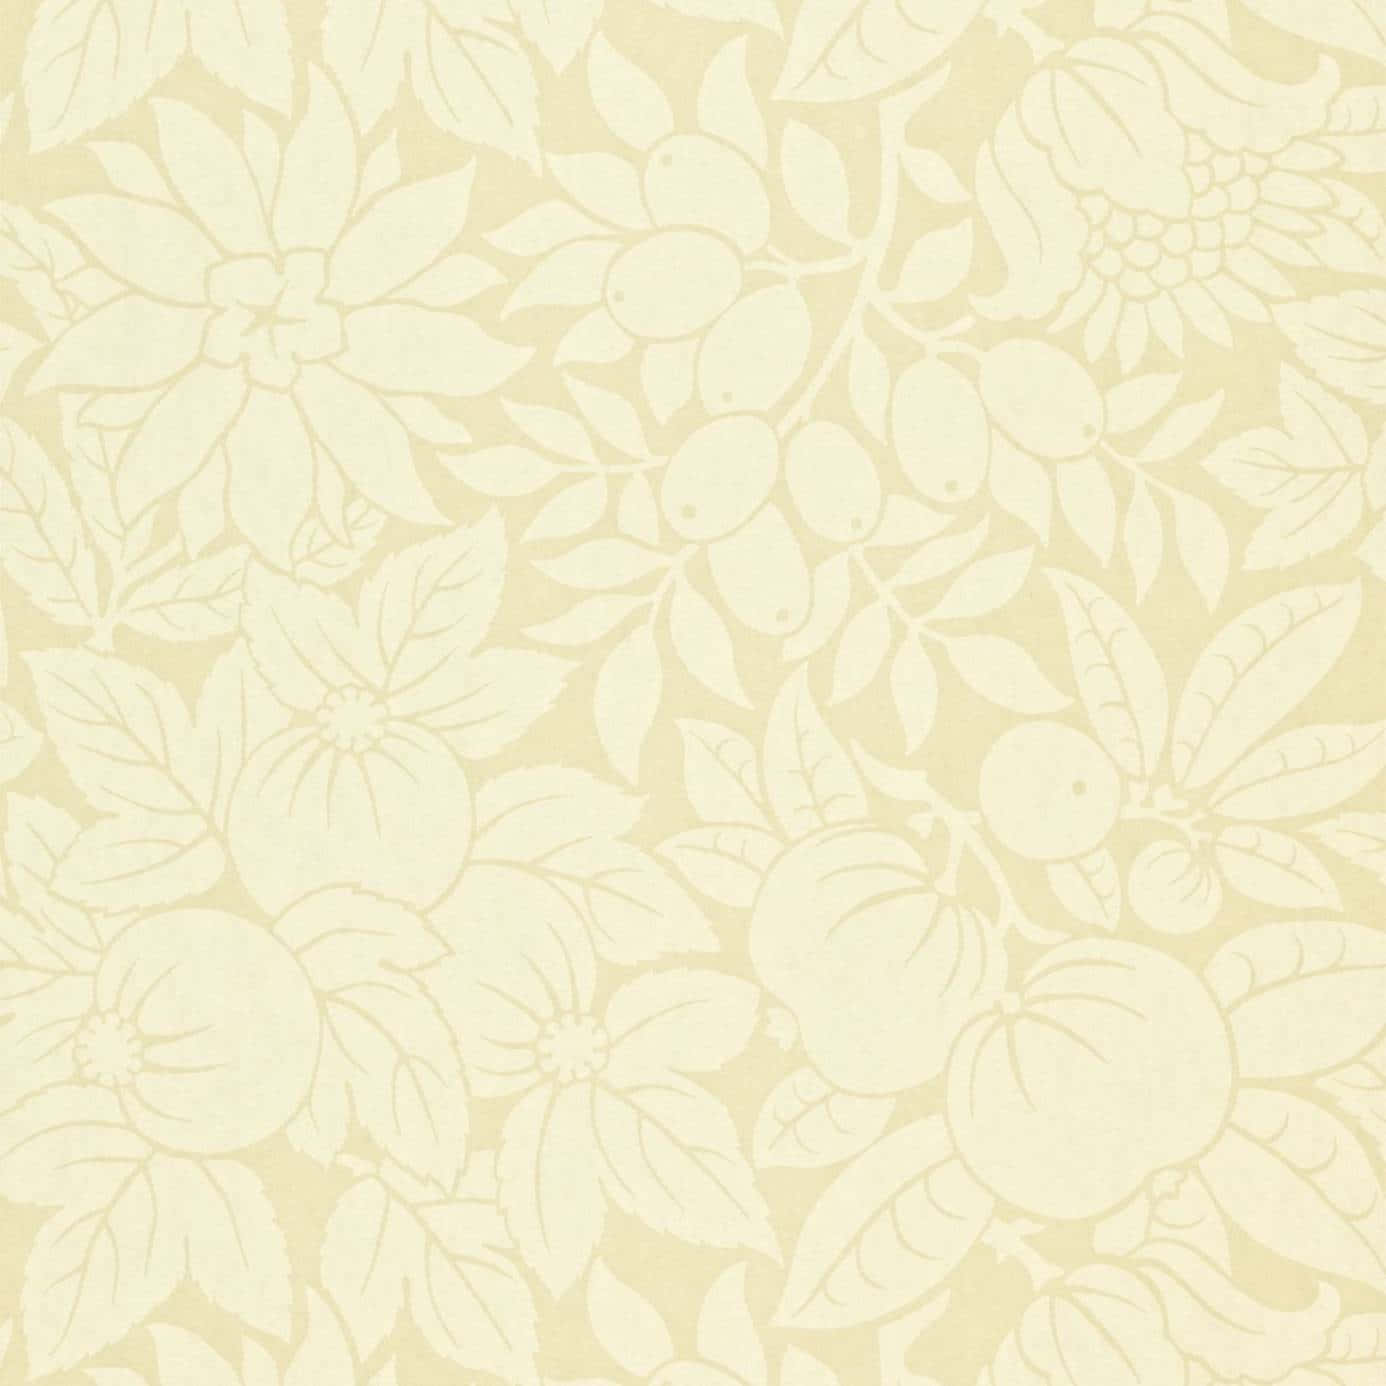 Soothing Cream Colored Wallpaper Wallpaper